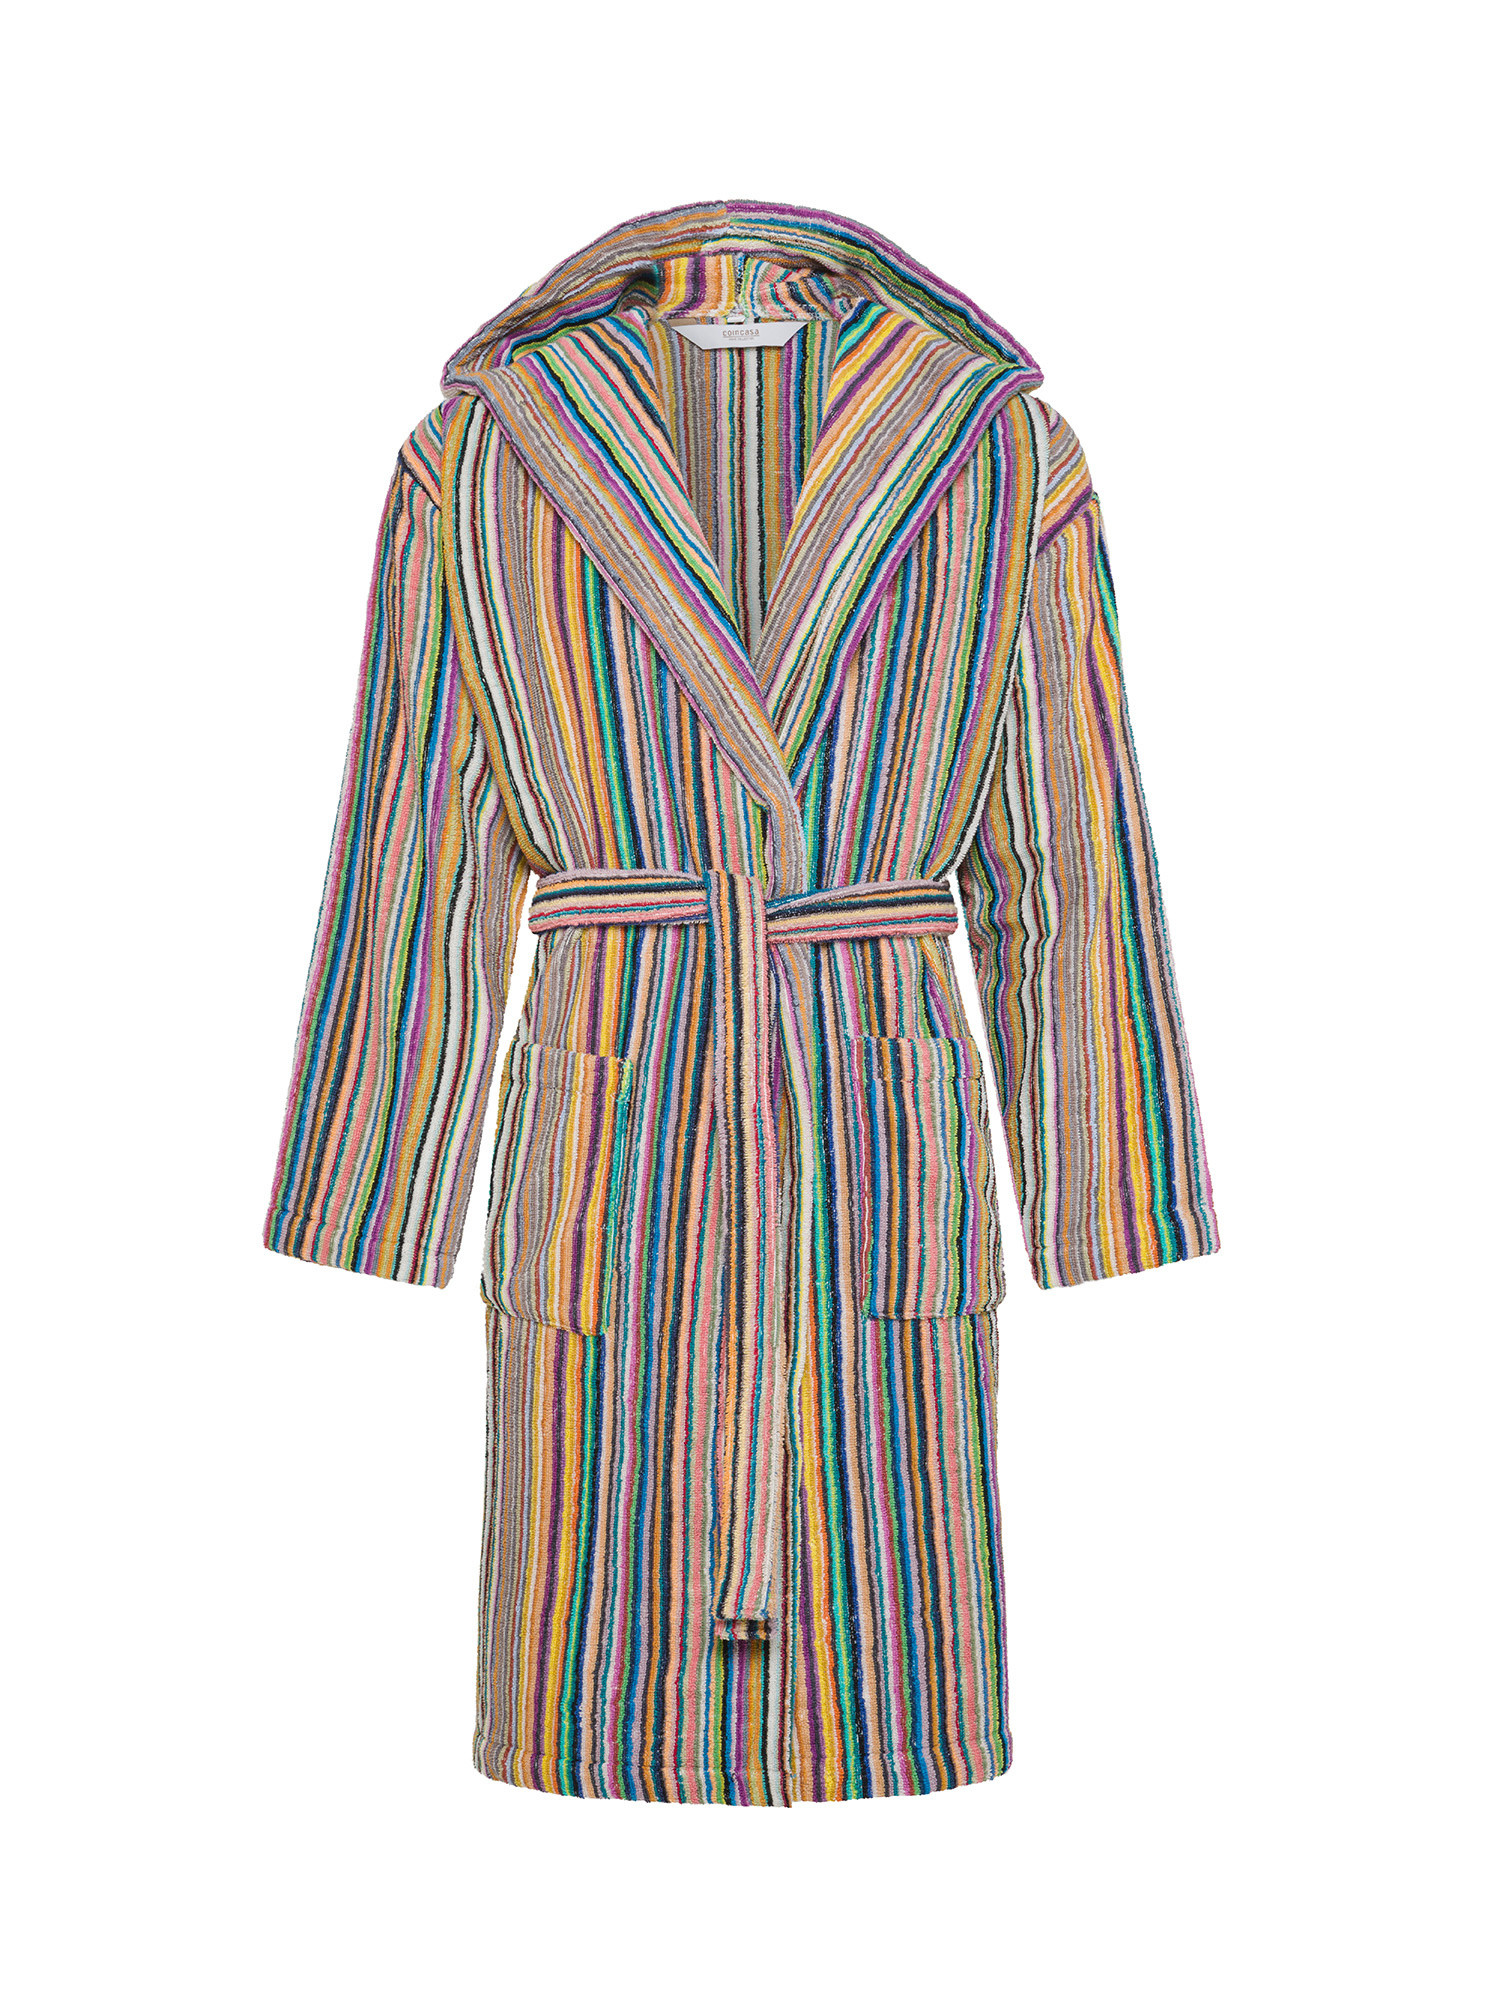 Striped jacquard cotton terry bathrobe, Multicolor, large image number 0